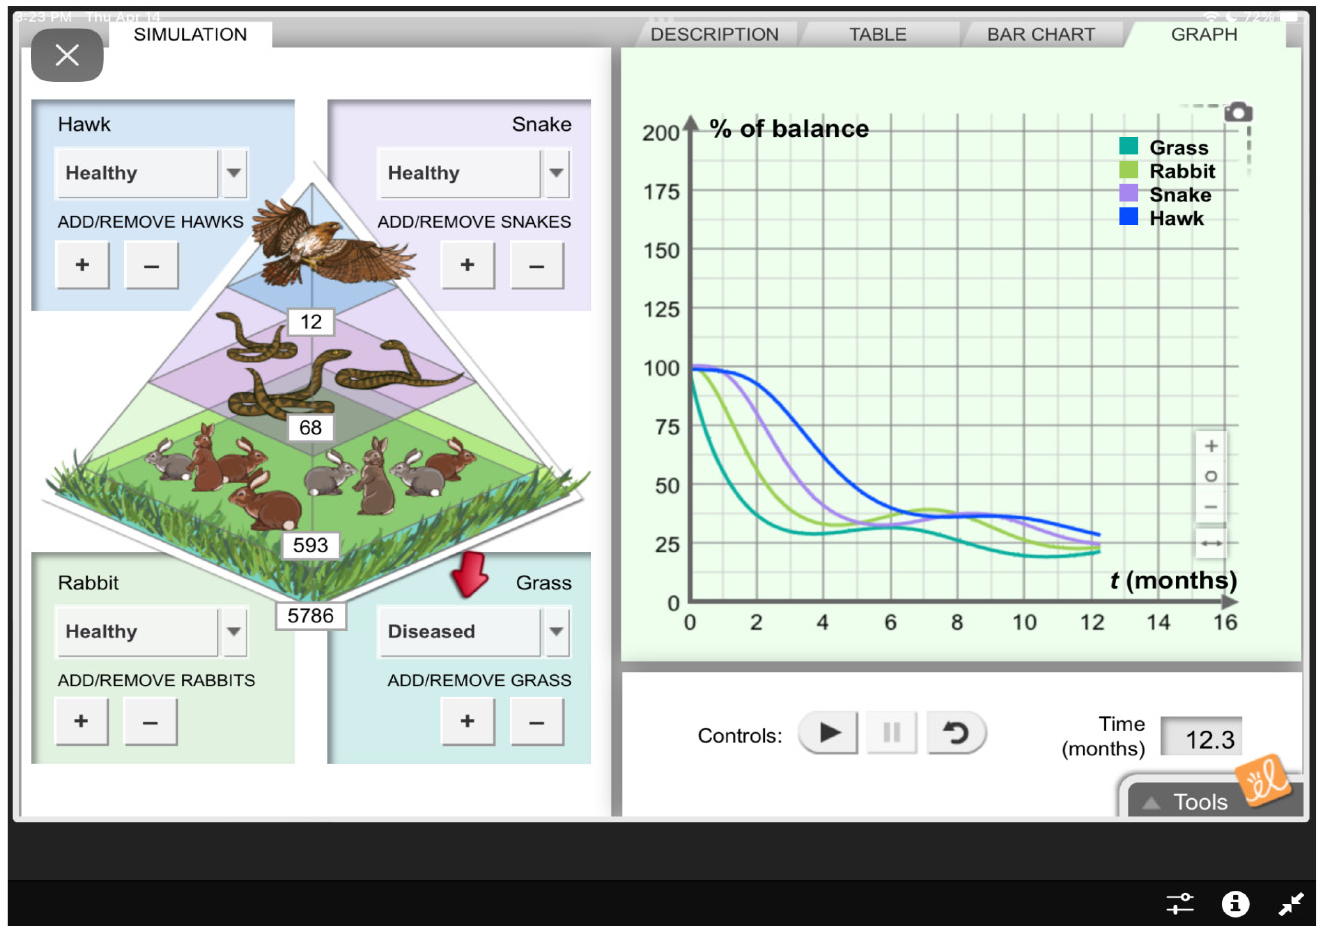 Gizmos simulation results for diseased grass.